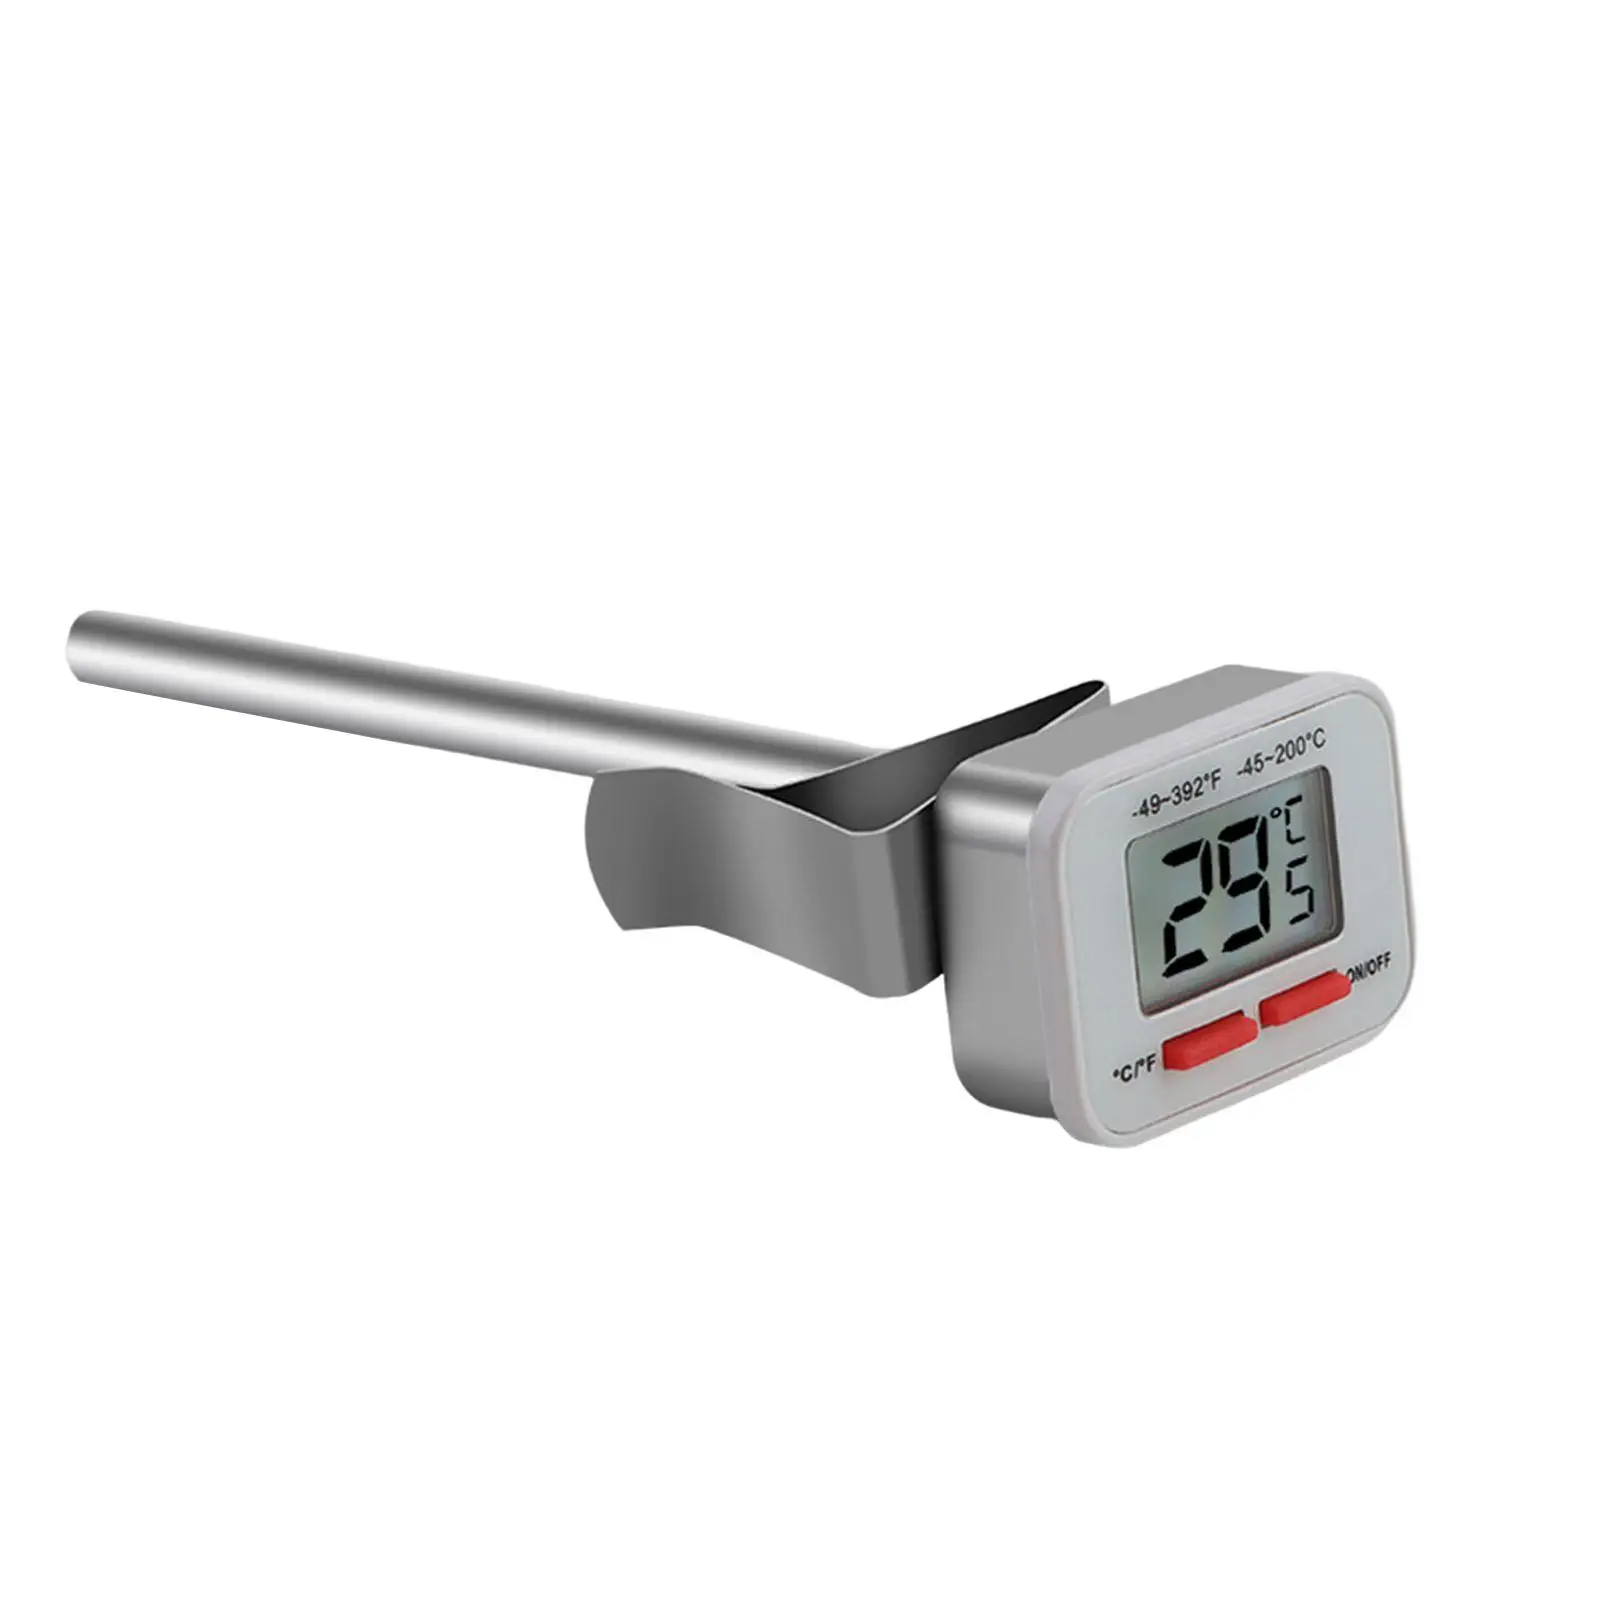 Coffee Thermometer Instant Read -45°C ~ 200°C for Deep Fry Cooking Outdoor